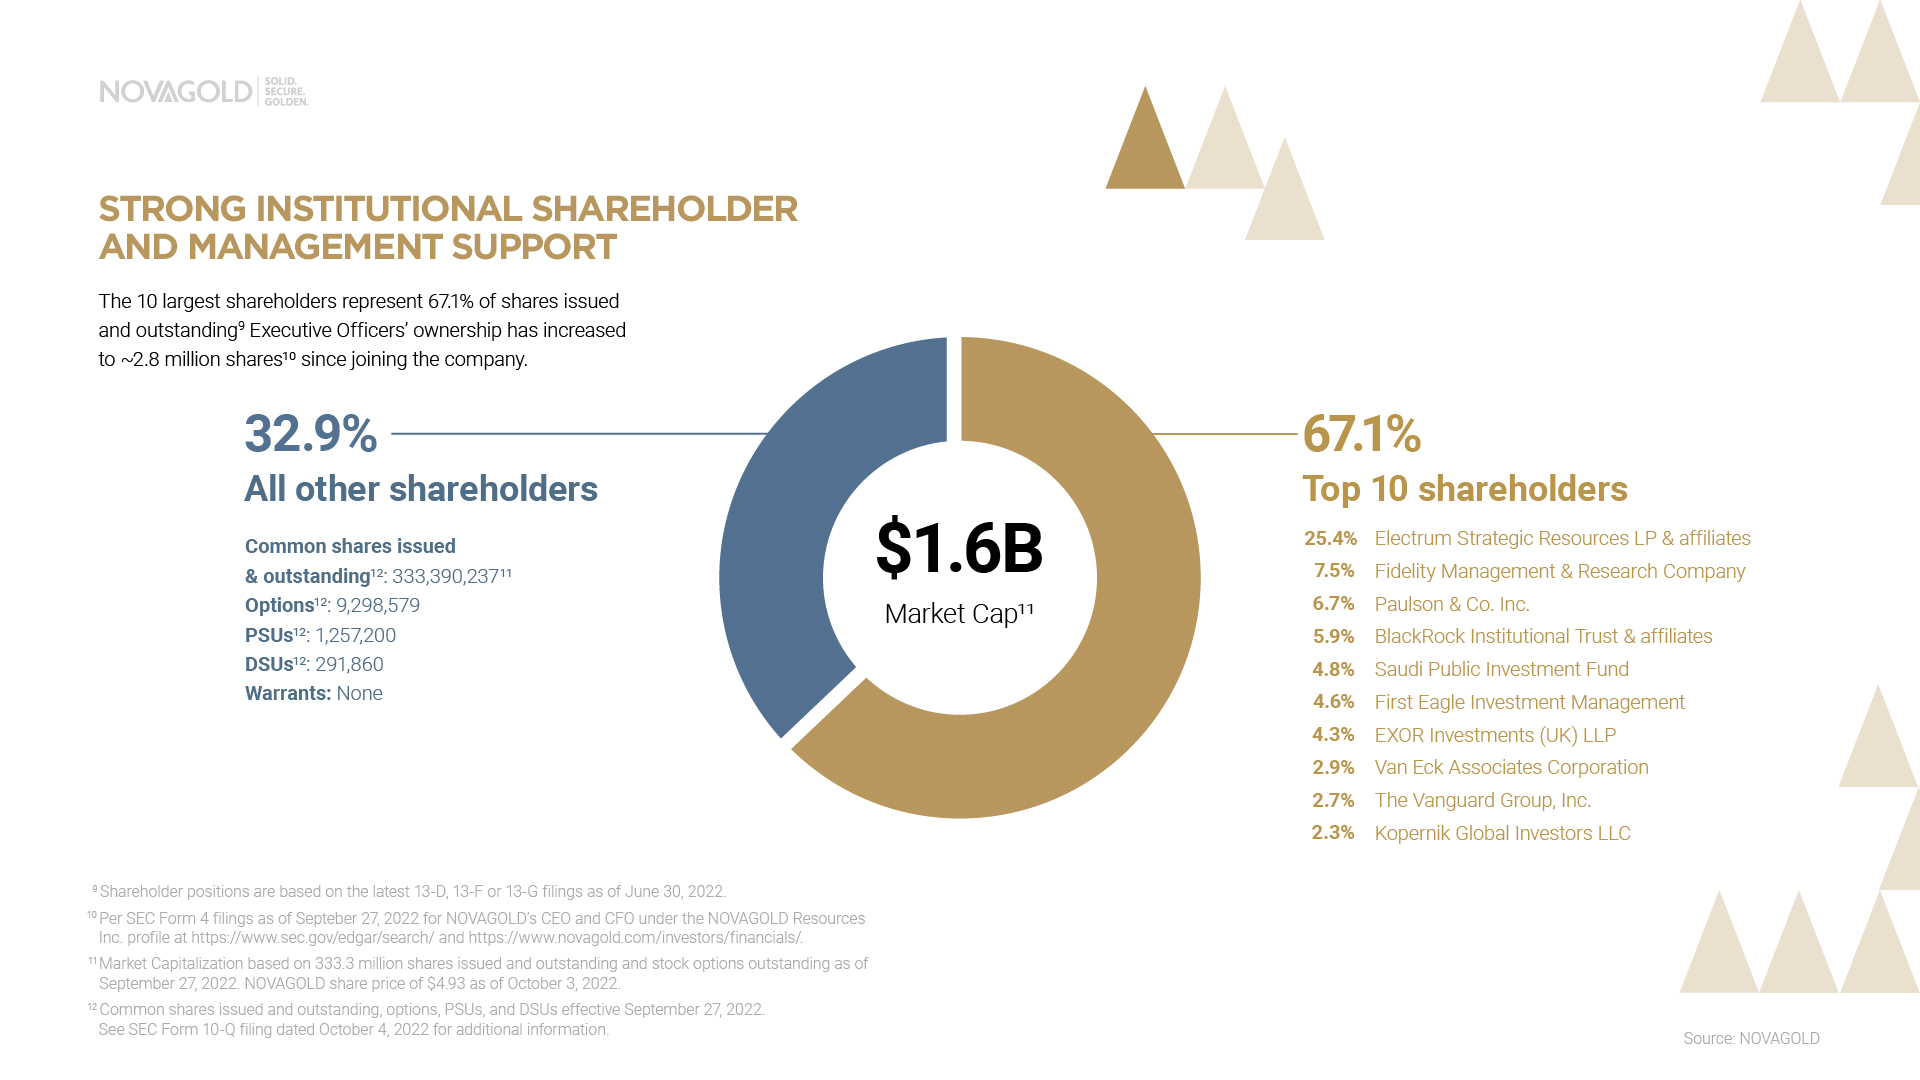 The 10 largest shareholders represent 67.1% of shares issued and outstanding.